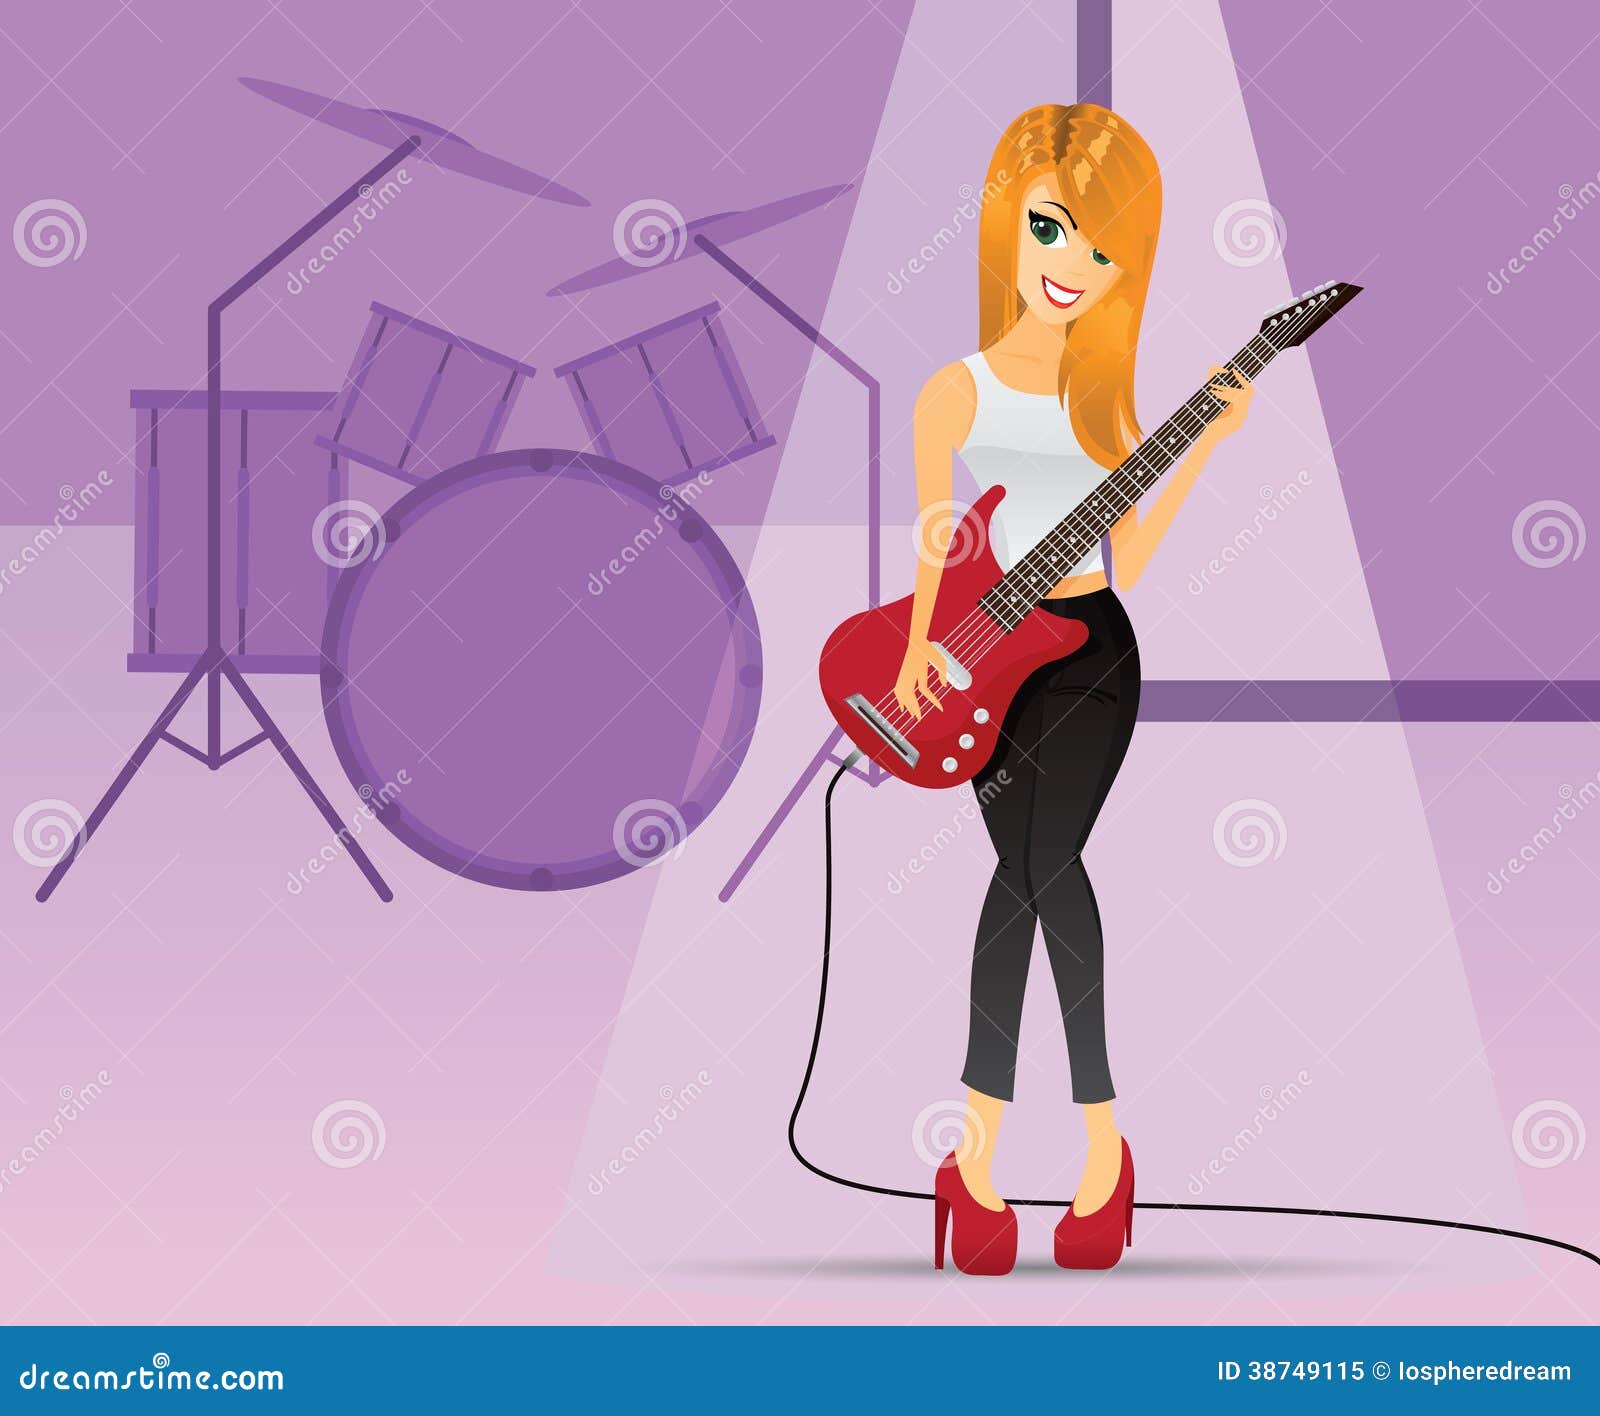 Girl Playing Electric Guitar on Stage Stock Vector - Illustration of ...